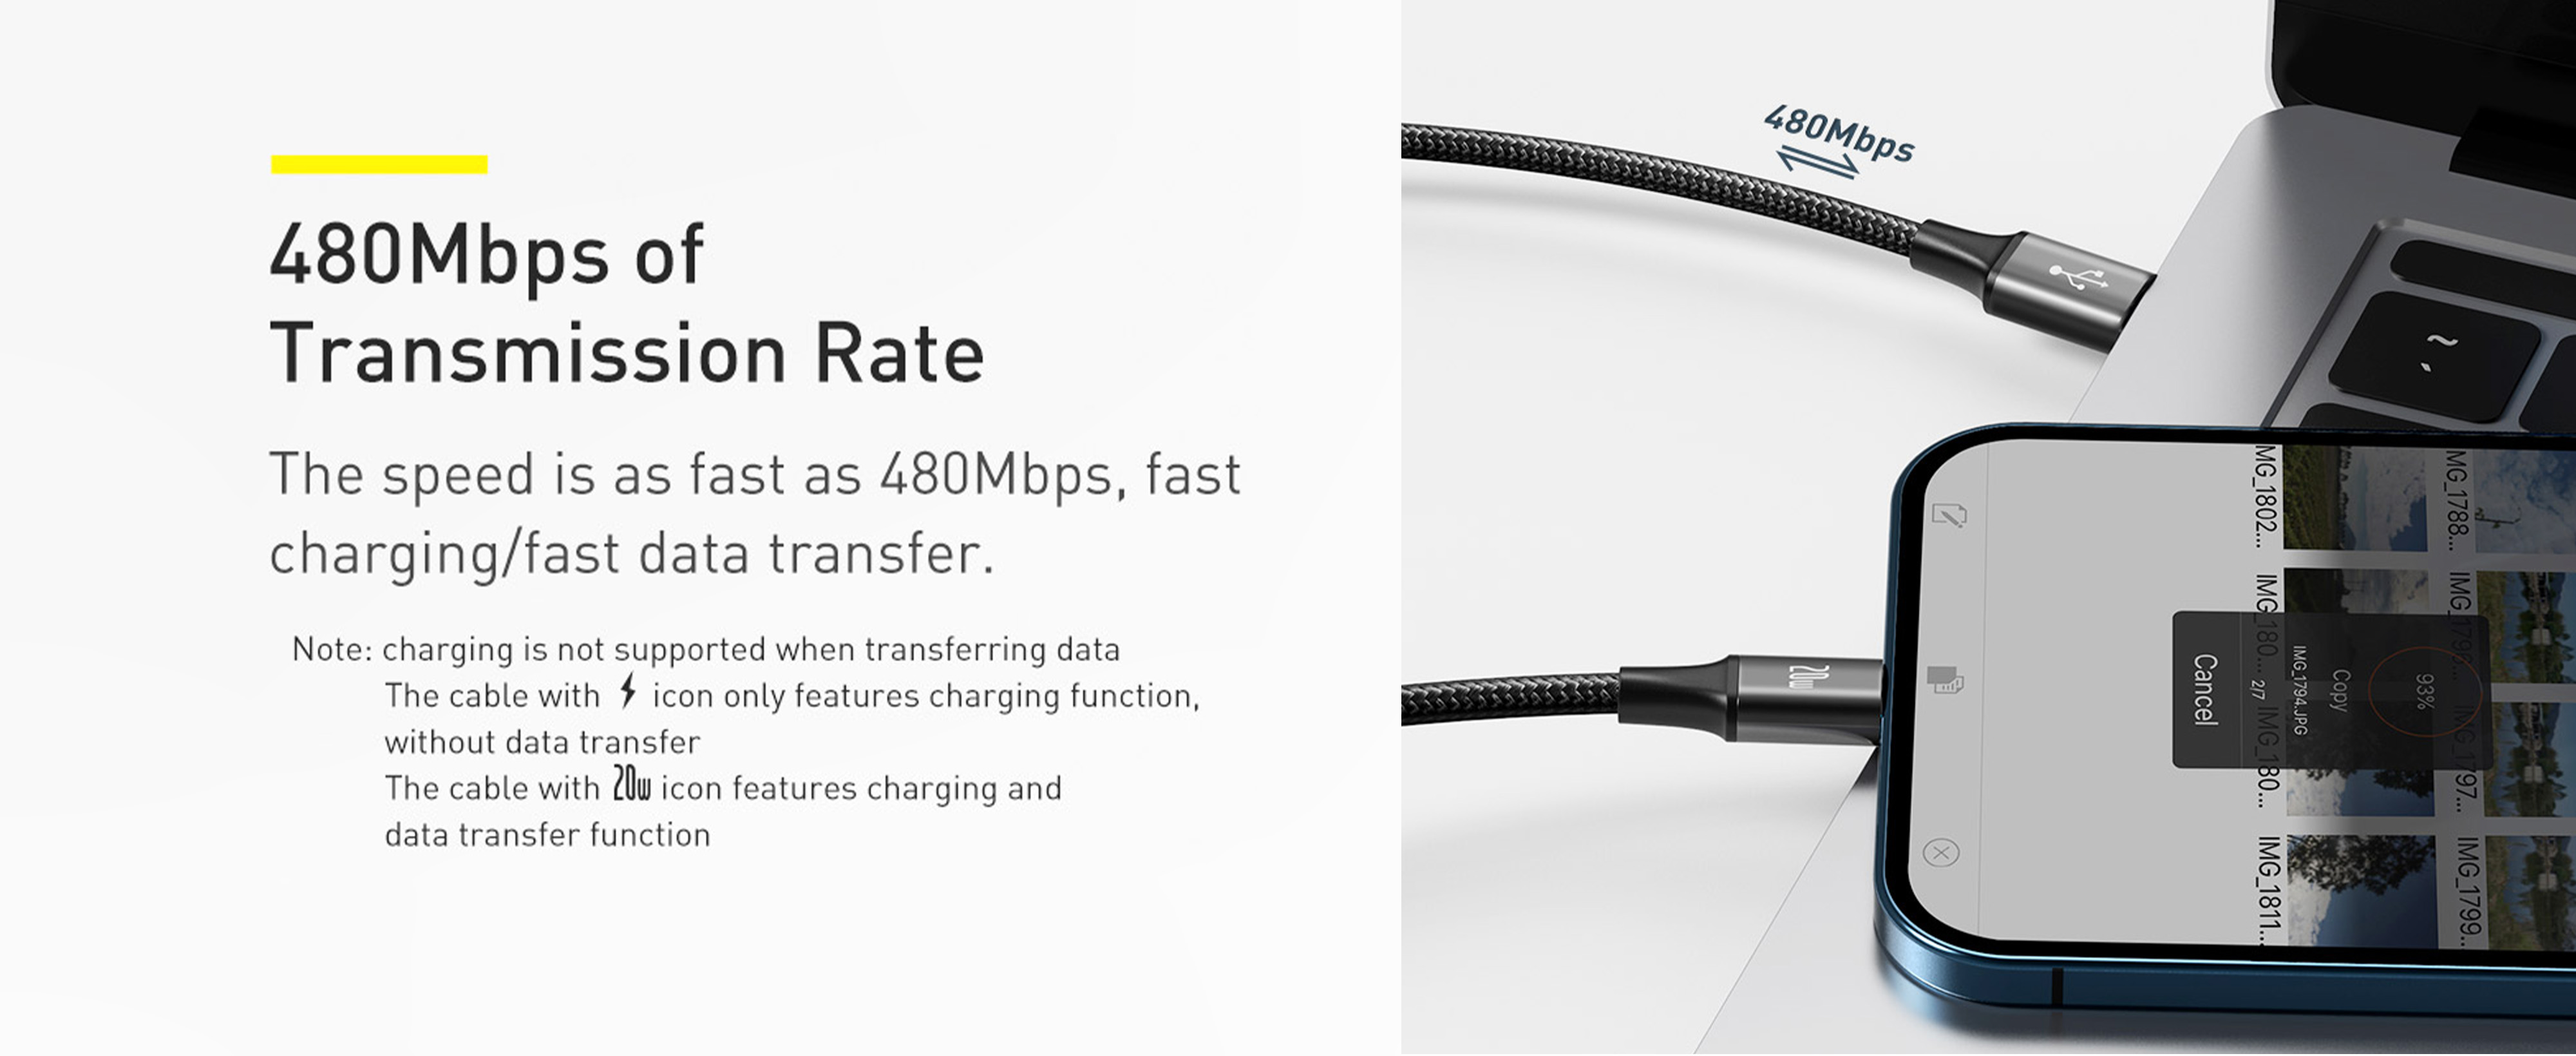 BASEUS Rapid Series 3-in-1 Fast Charging Data Cable Type-C to M+L+C PD 20W 1.5m - Black